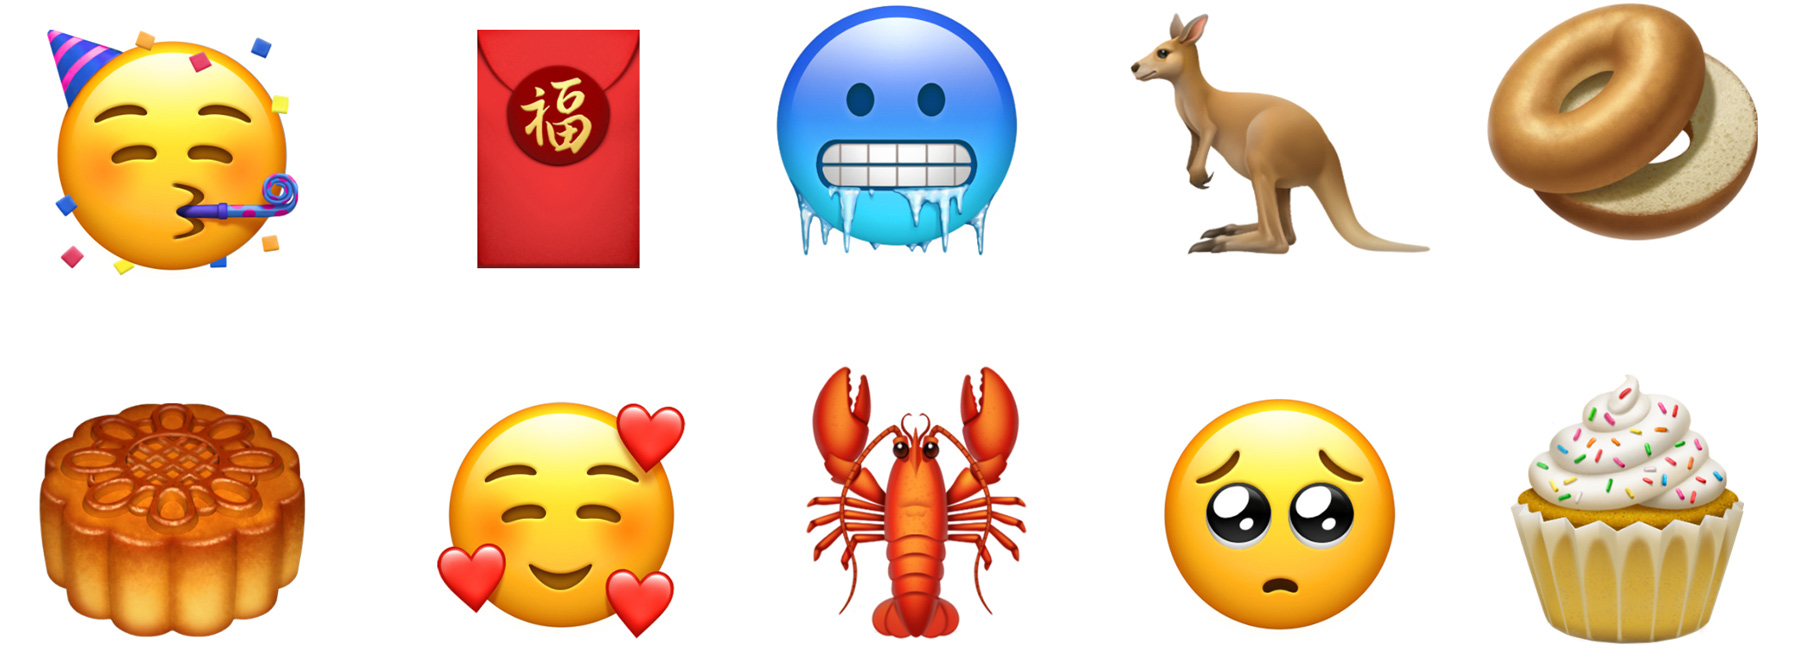 apple unveils more than 70 new emoji with iOS 12.1